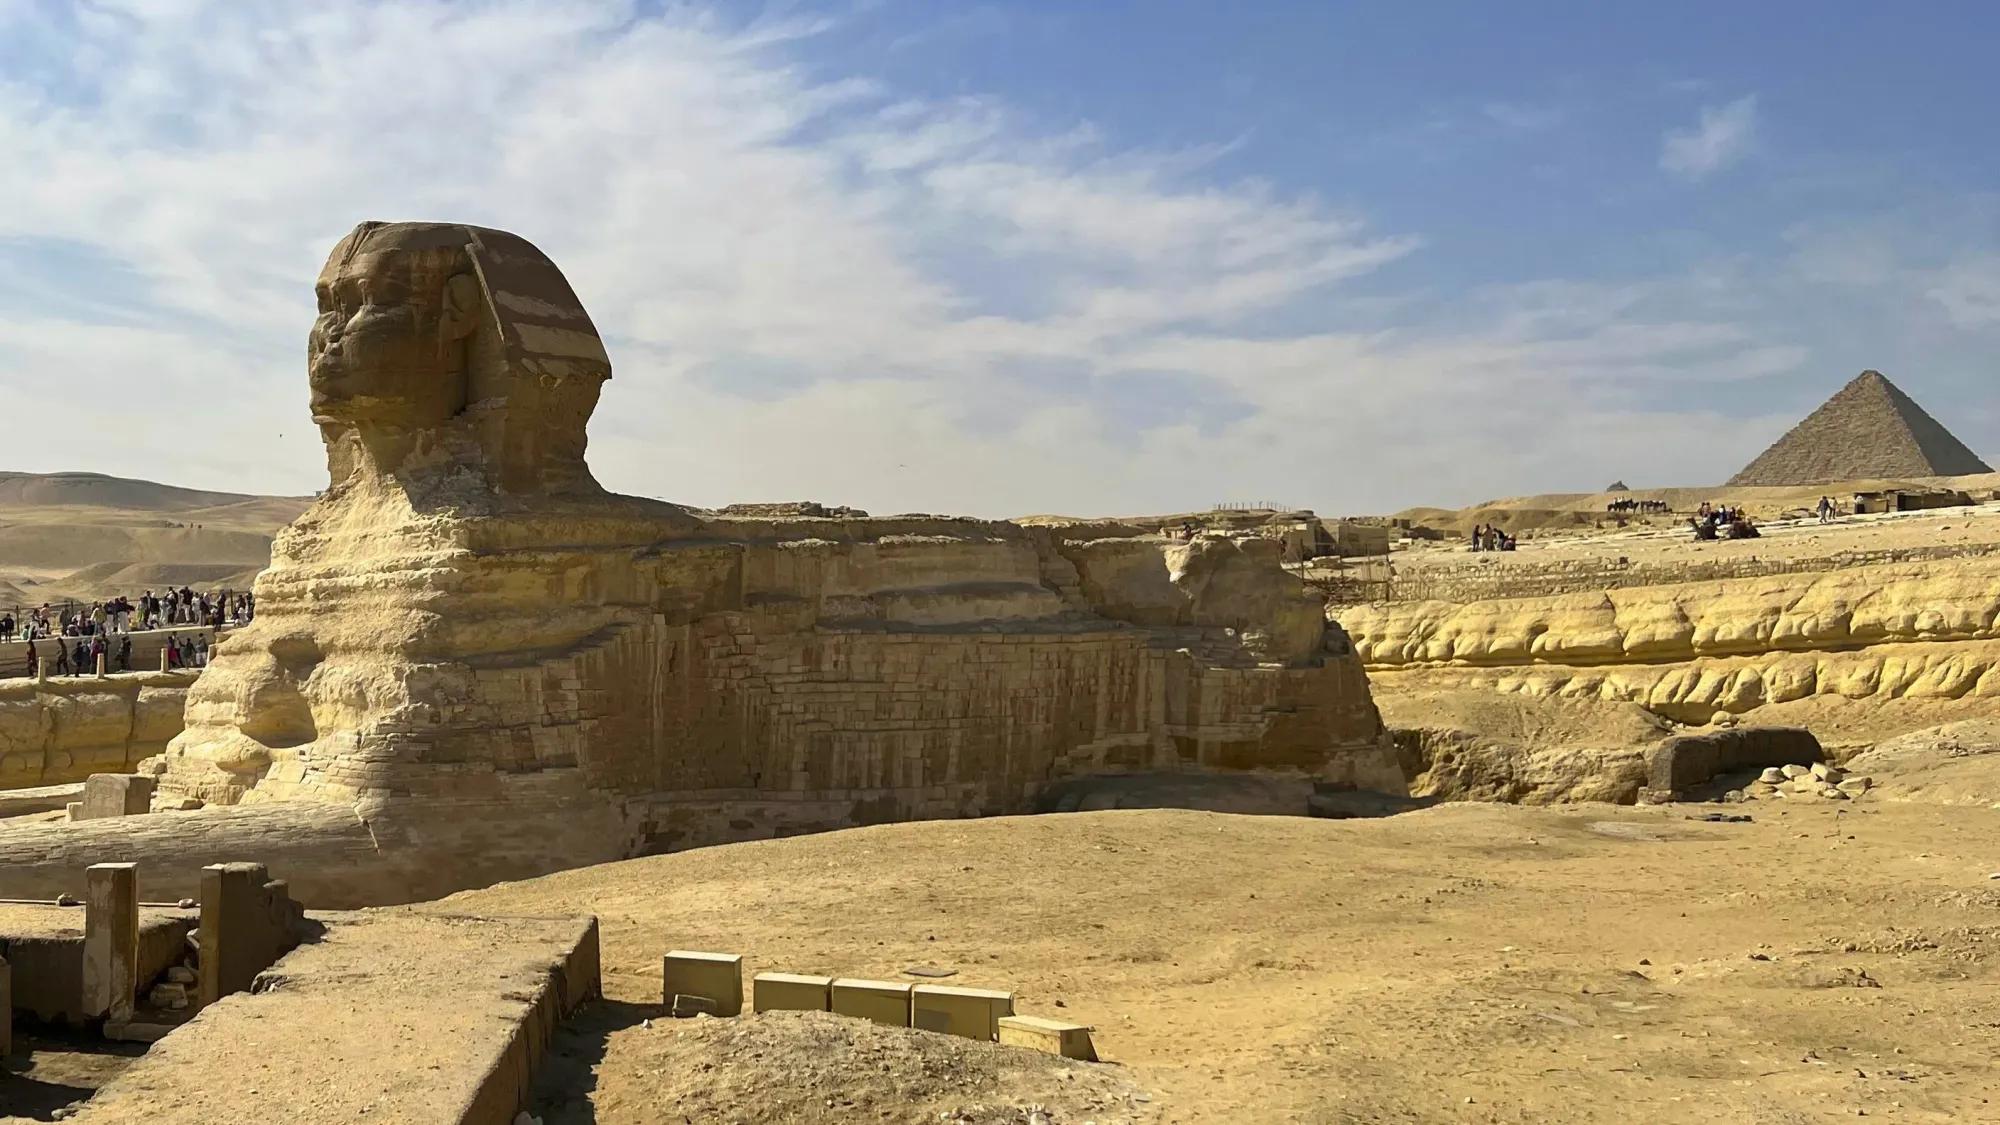 The sphinx with a pyramid in the background